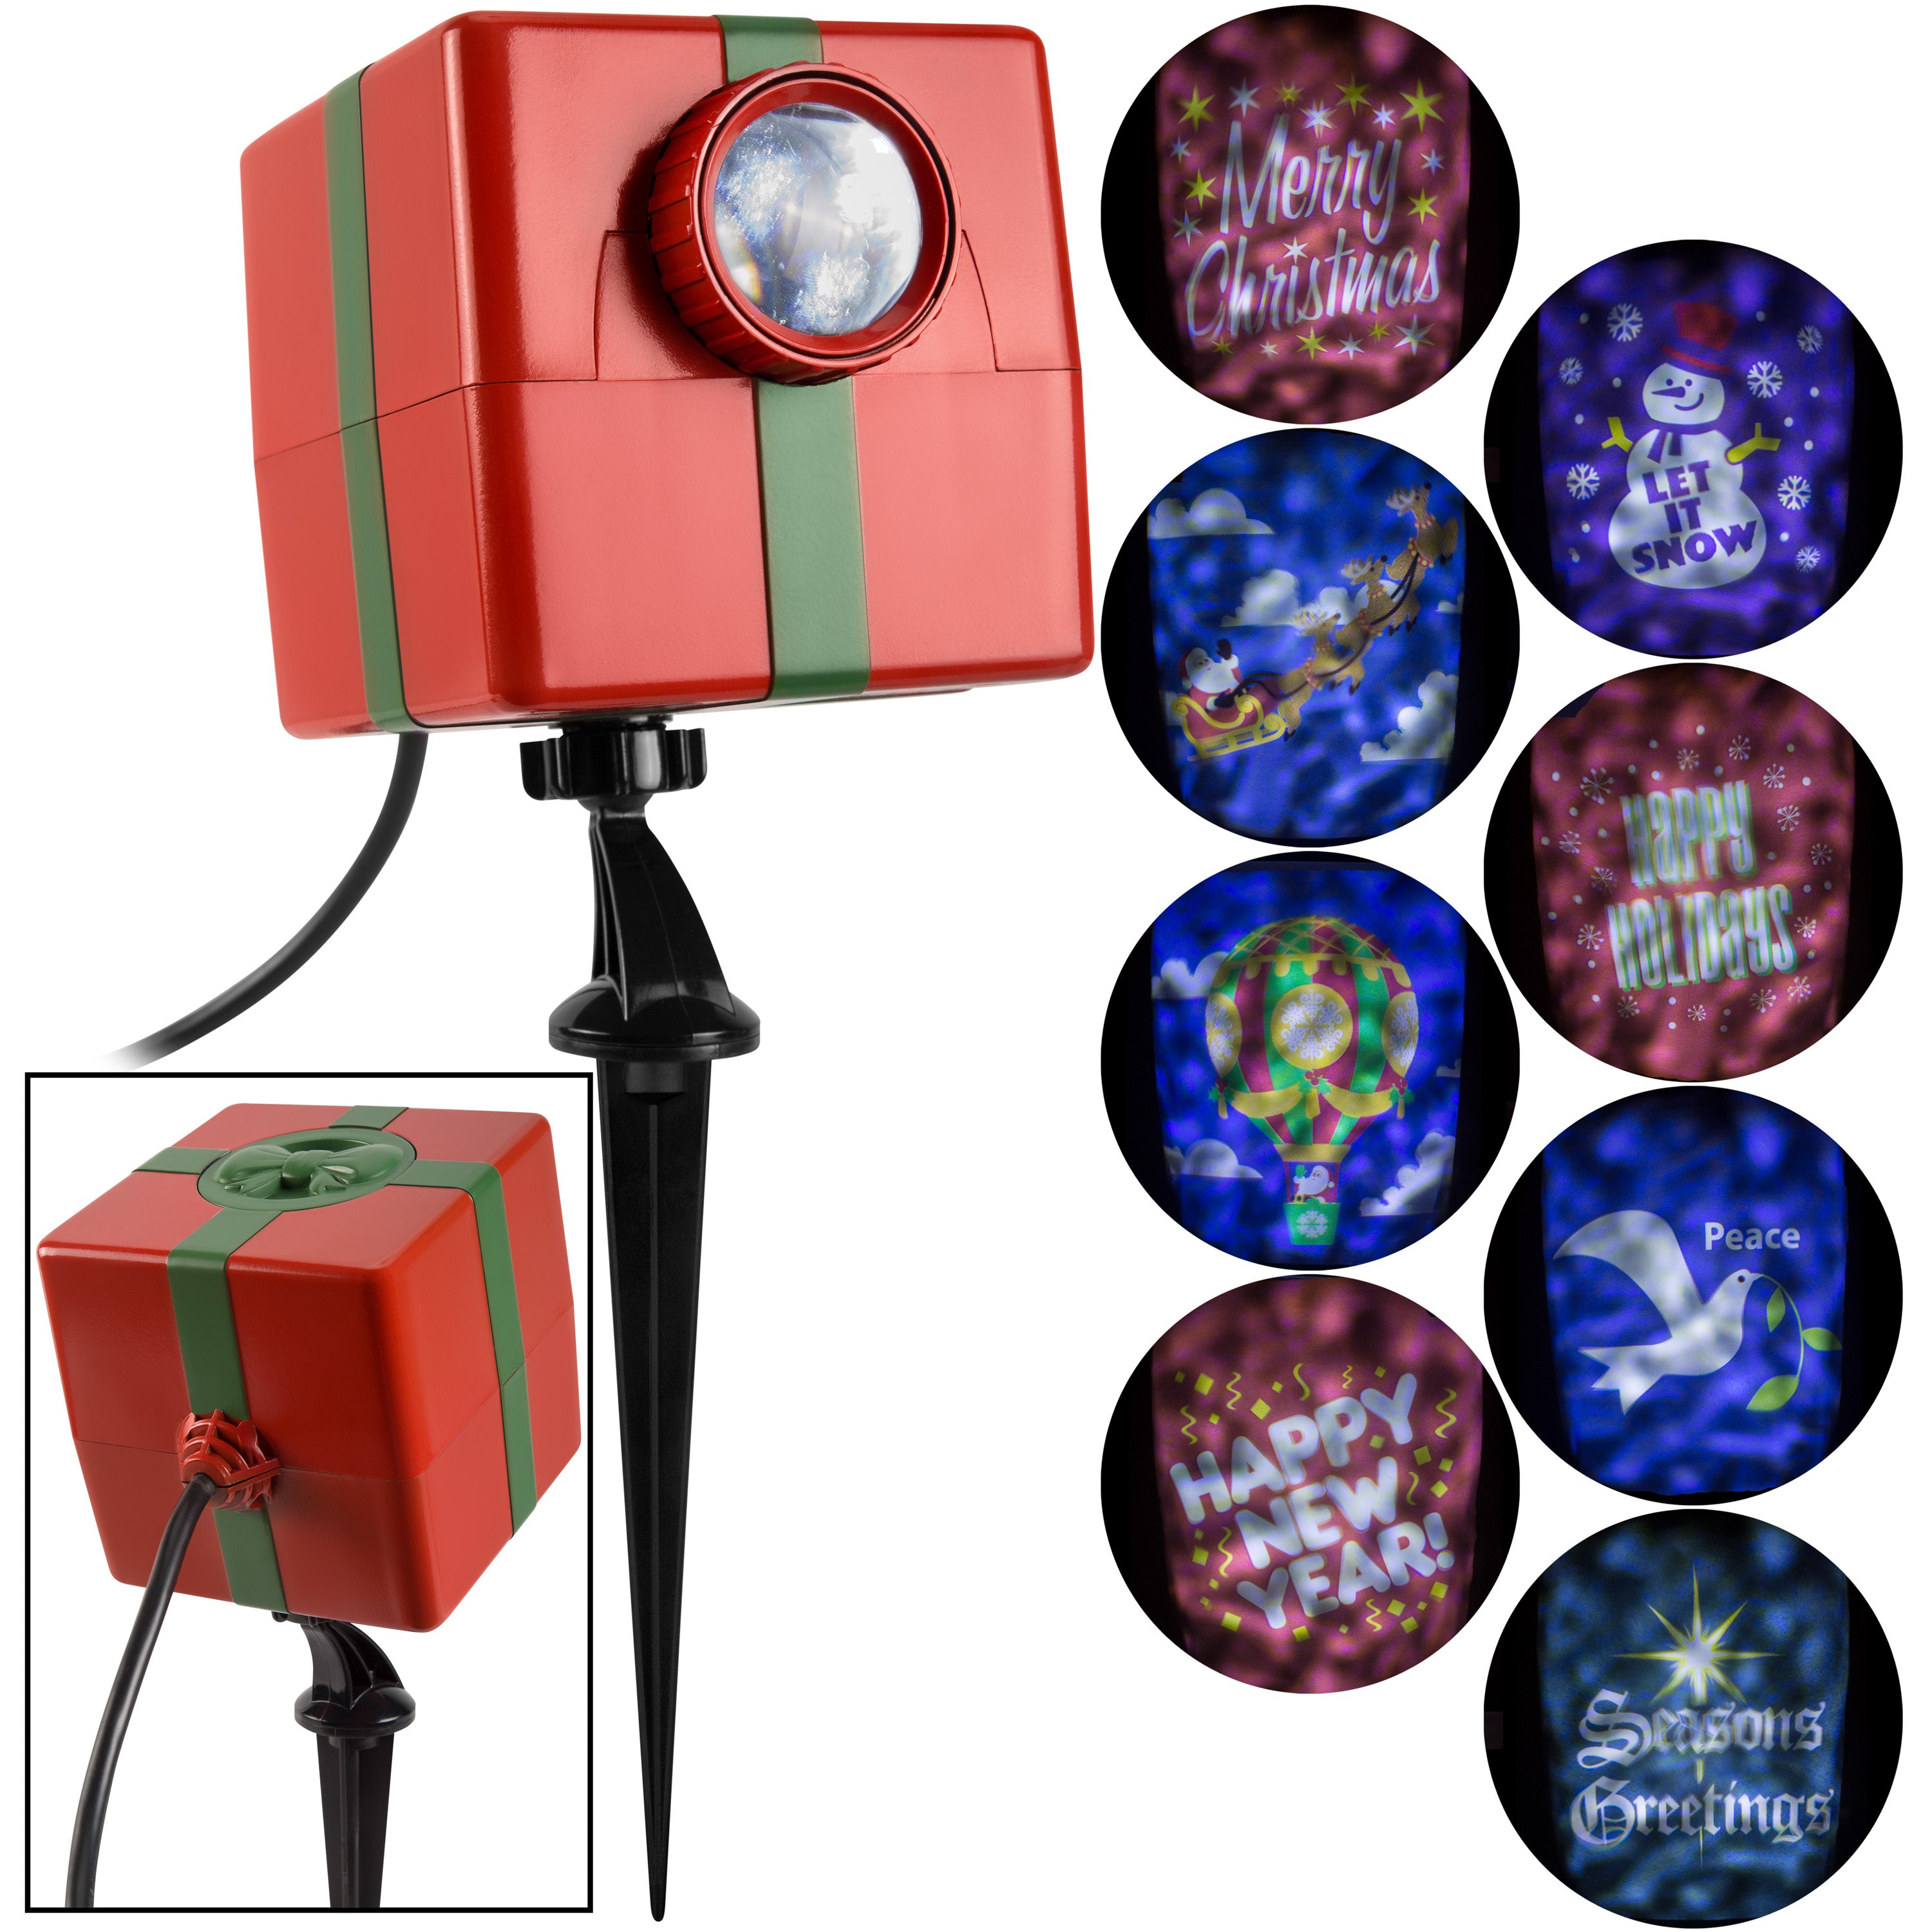 Gemmy Christmas Lightshow Projection-Fire & Ice-Holiday Projector w/8 Slides